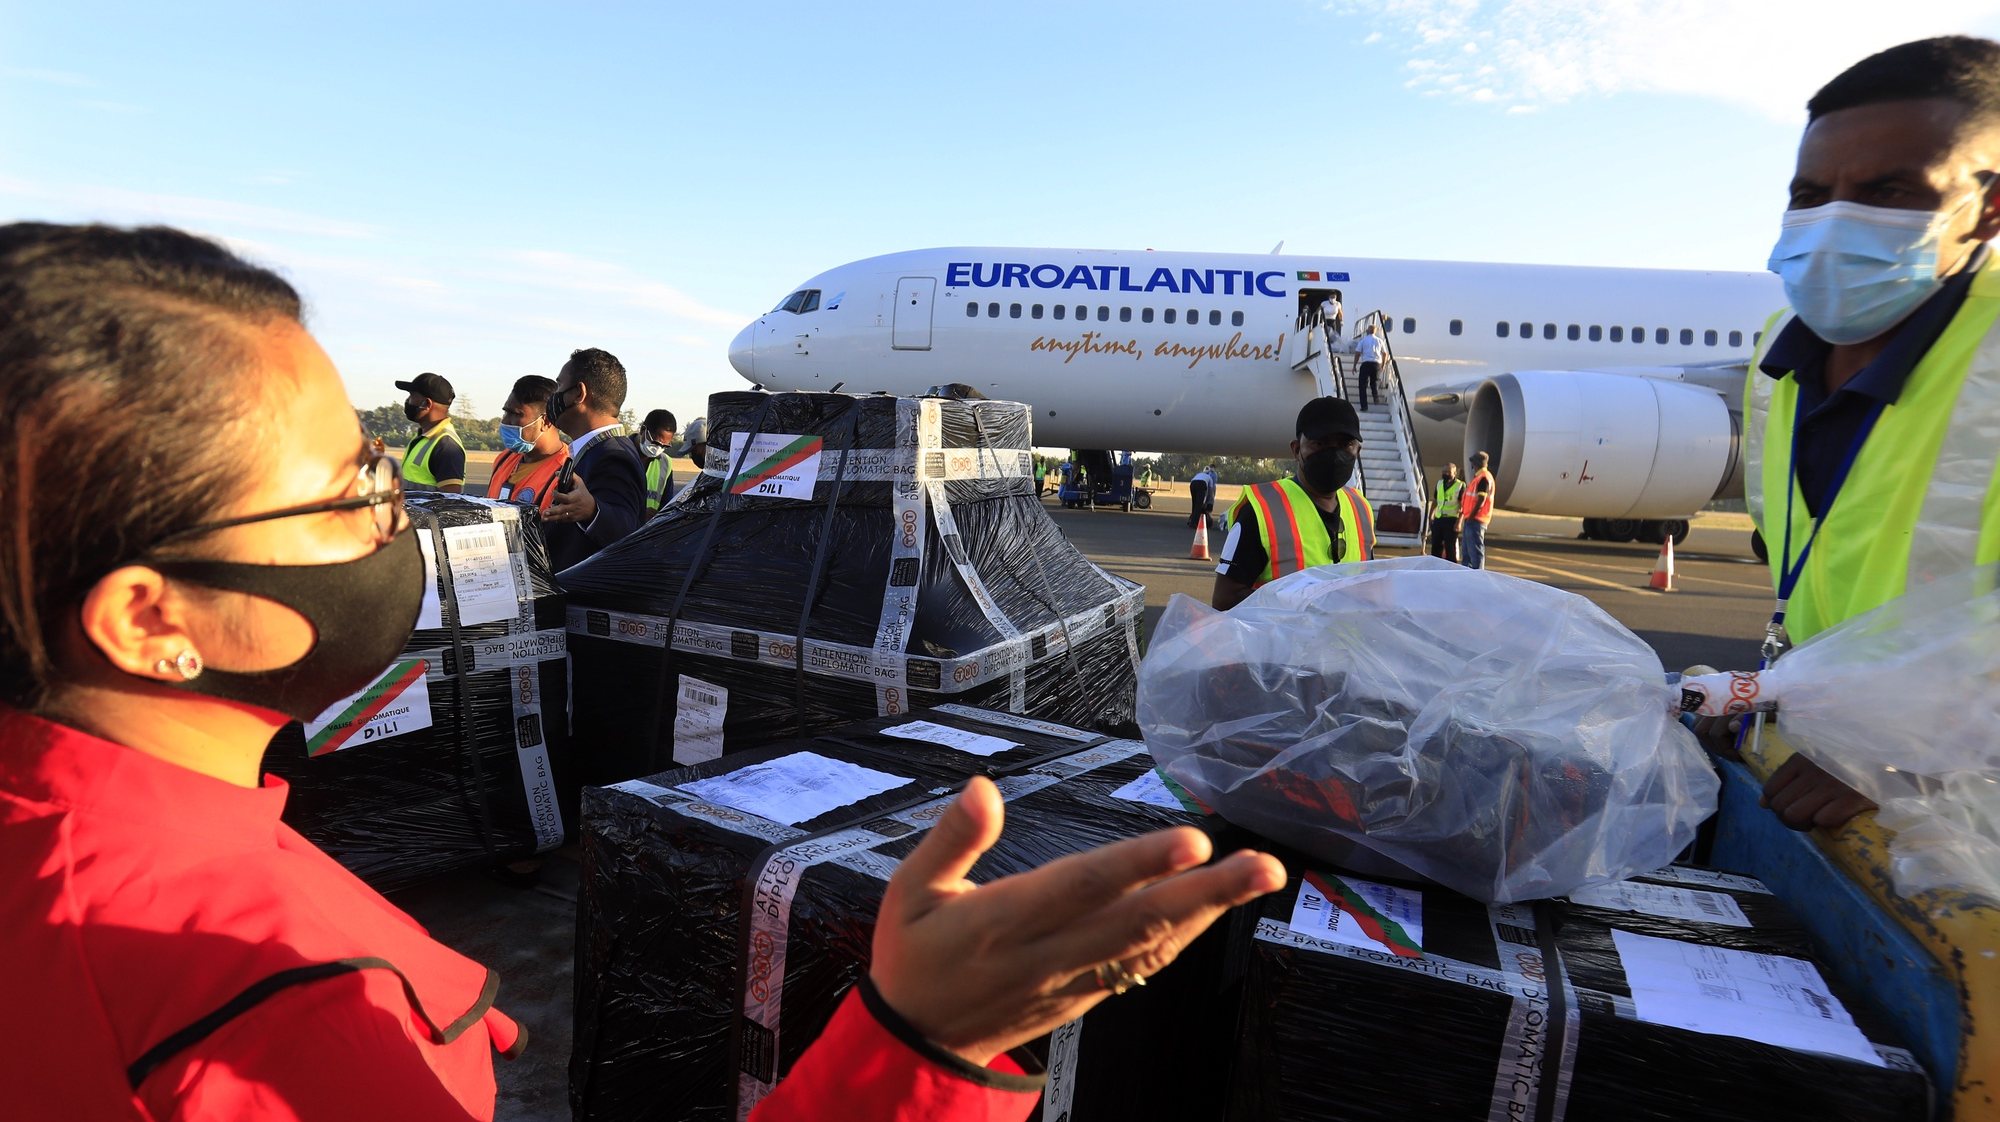 epa09354031 Workers unload AstraZeneca (Vaxzevria) Covid-19 vaccines donated by Portugal&#039;s government from an airplane during the arrival at Nicolau Lobato International Airport in Dili, East Timor, also known as Timor Leste, 20 July 2021. East Timor has recorded more than 10,000 coronavirus disease (COVID-19) cases since the beginning of the pandemic.  EPA/ANTONIO DASIPARU